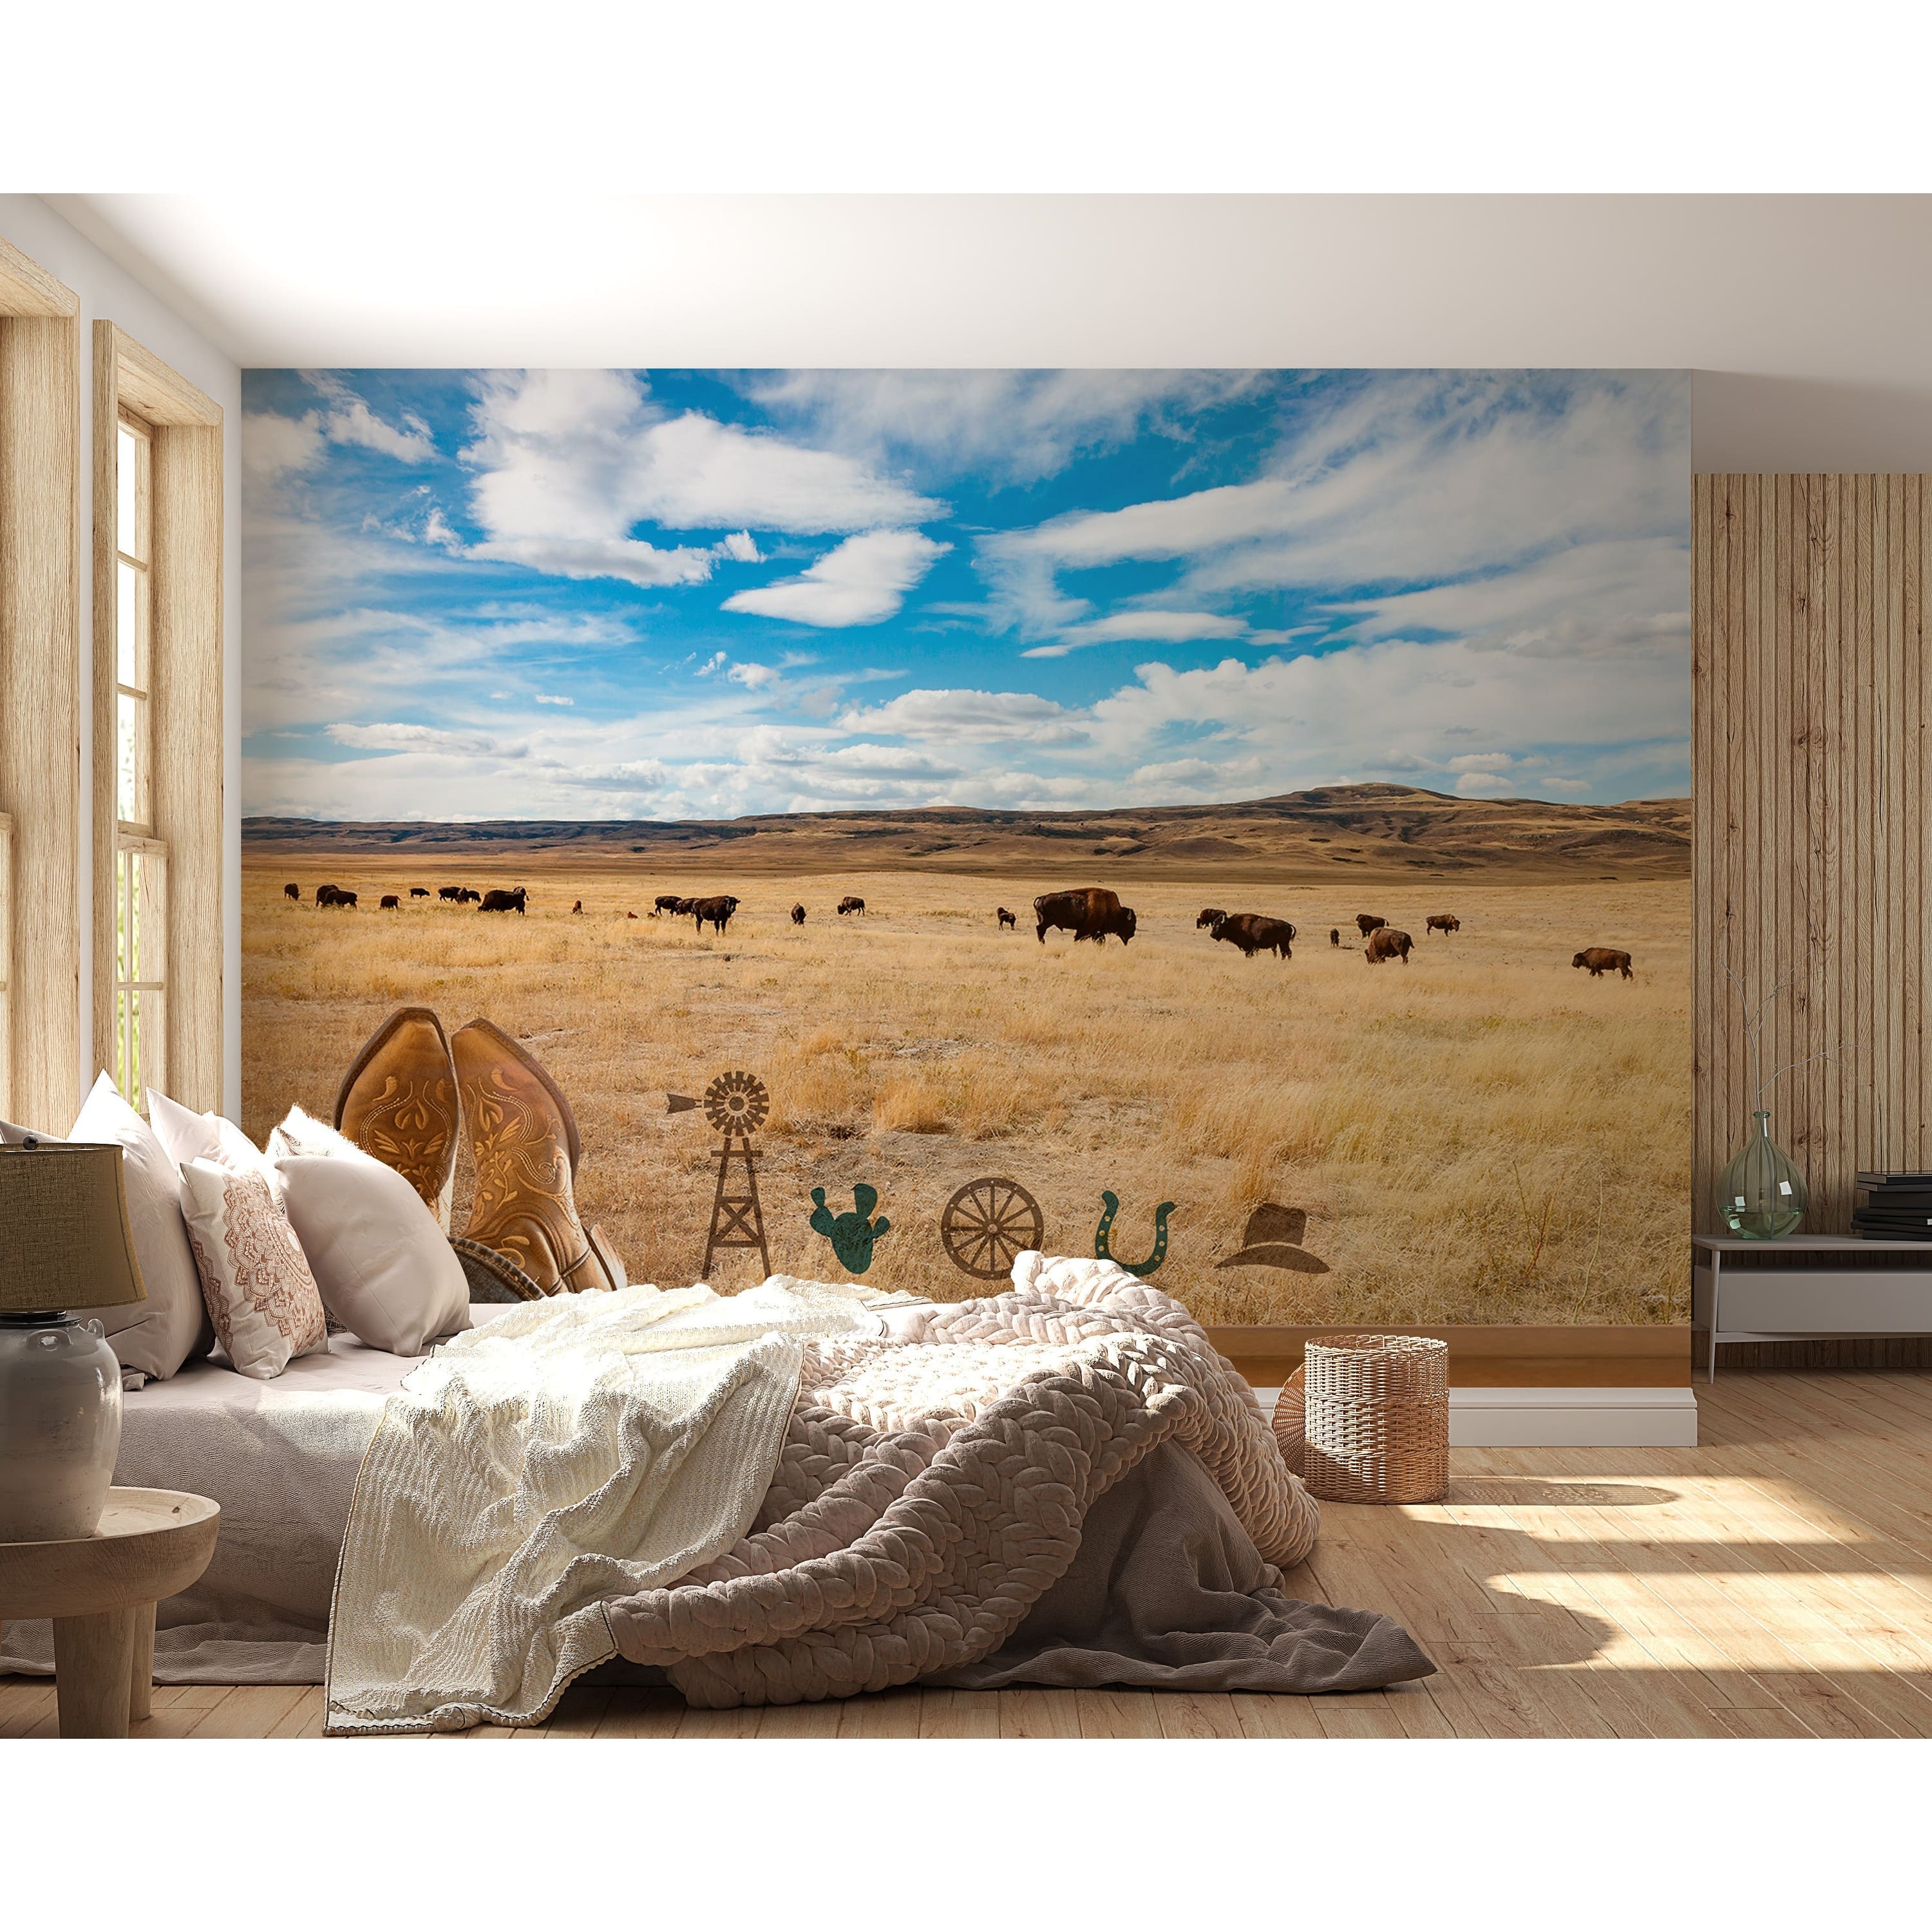 Peel & Stick Landscape Wall Mural - Texas Ranch - Removable Wallpaper ...